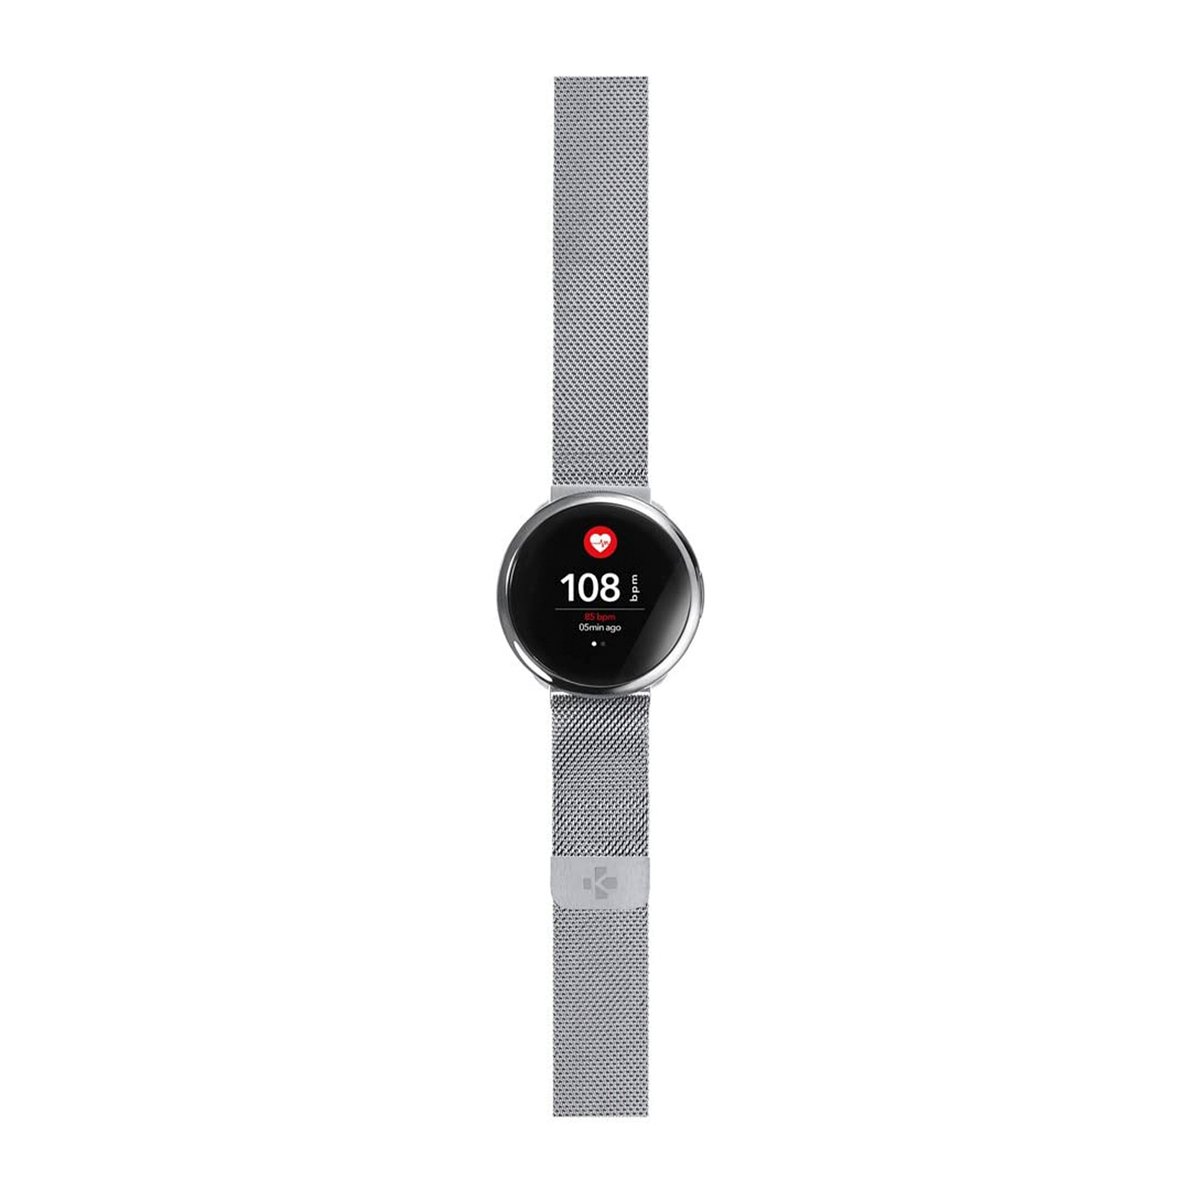 MyKronoz ZeRound2 HR Elite Smartwatch with Heart Rate Monitor and Smart Notifications, Silver